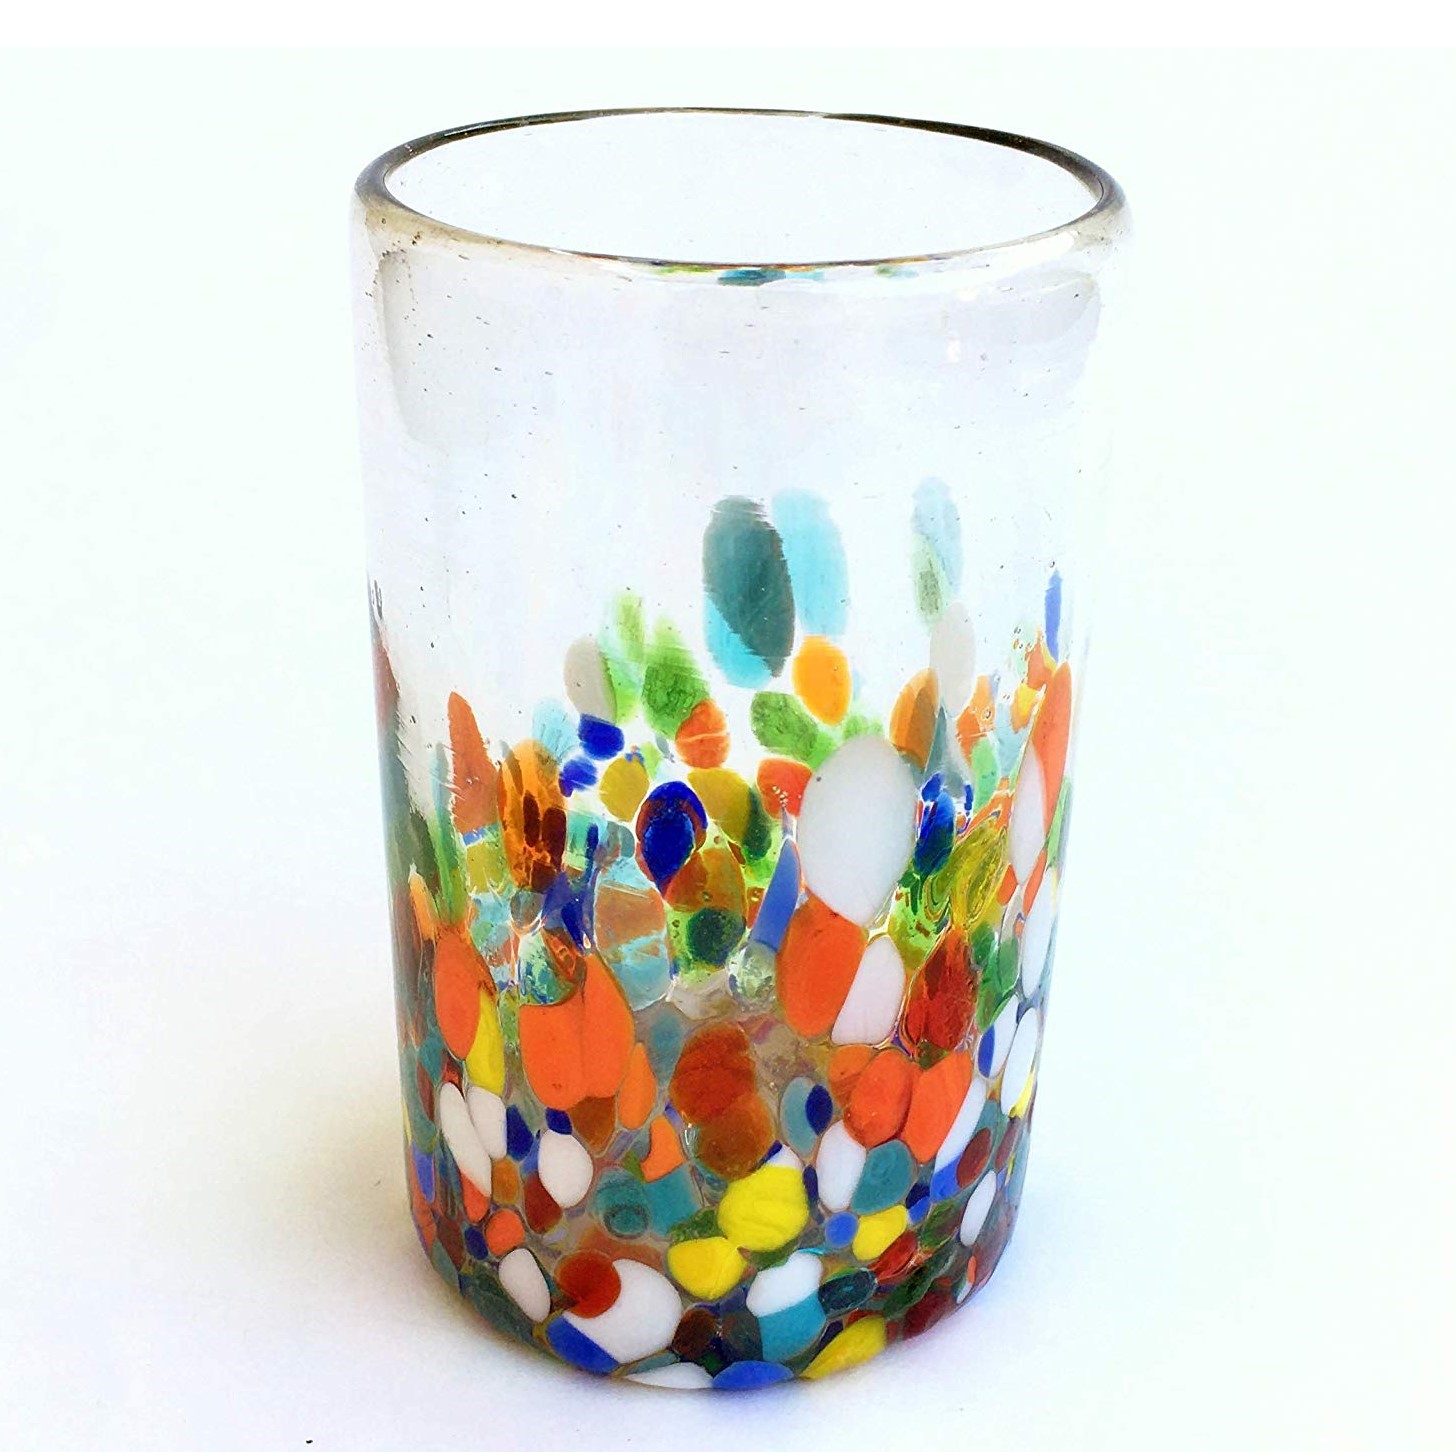 Confetti Glassware / Clear & Confetti 14 oz Drinking Glasses (set of 6) / Our Clear & Confetti drinking glasses combine the best of two worlds: clear, thick, sturdy handcrafted glass on top, meets the colorful, festive, confetti bottom! These glasses will sure be a standout in any table setting or as a fabulous gift for your loved ones. Crafted one by one by skilled artisans in Tonala, Mexico, each glass is different from the next making them unique works of art. You'll be amazed at how they make having a simple glass of water a happier experience. Each glass holds approximately 14 oz of liquid and stands a bit over 5